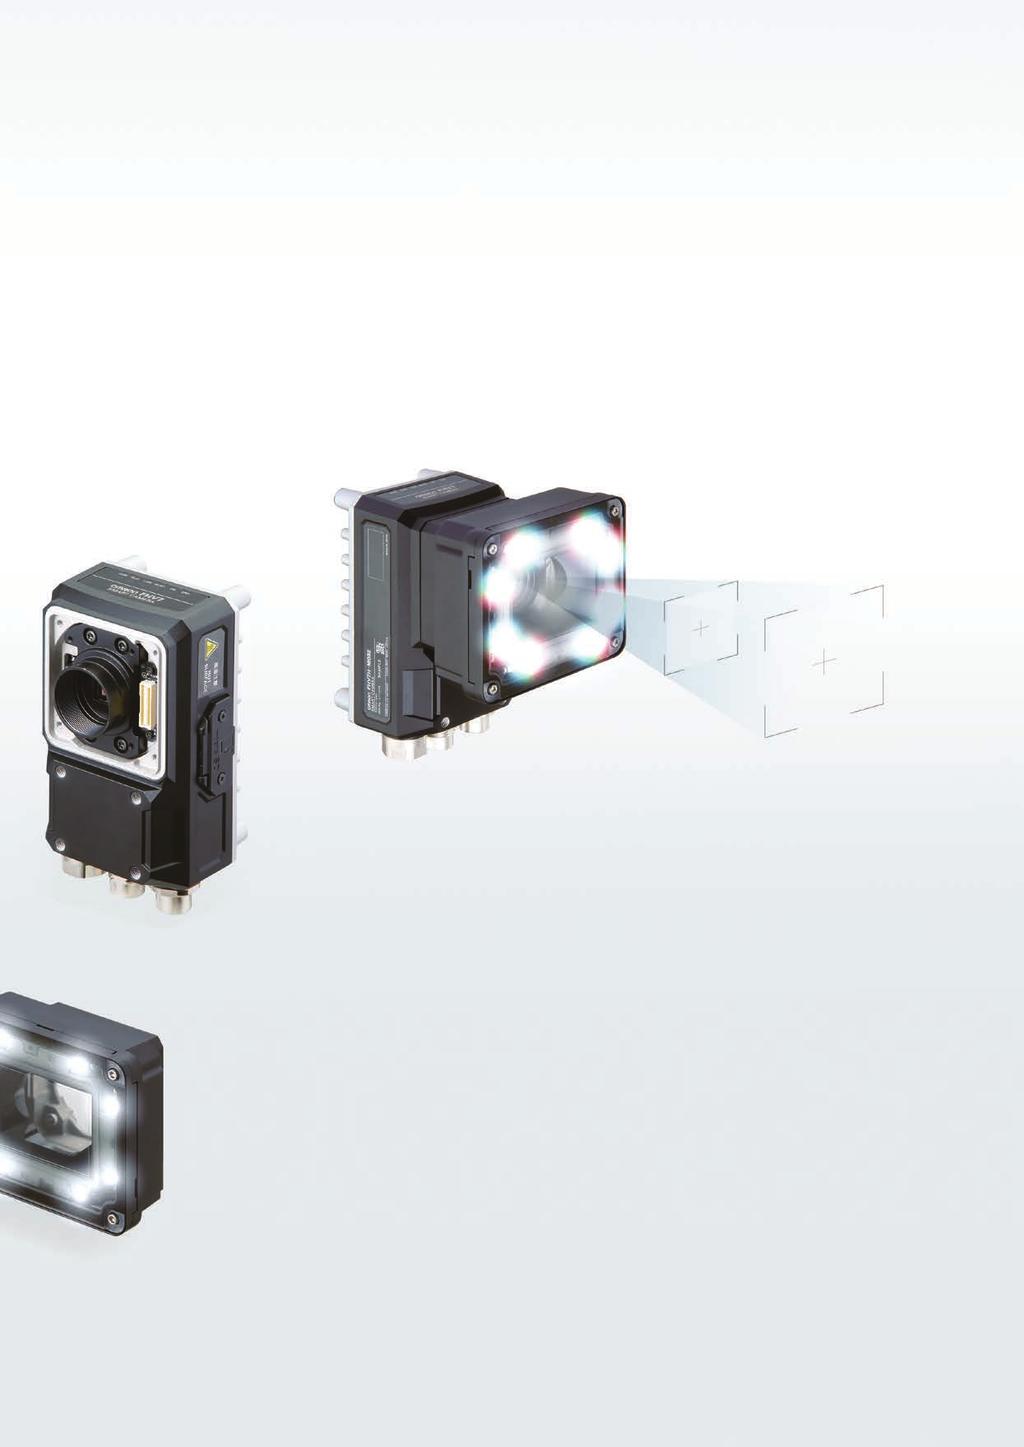 3 Single camera for inspecting various products P.